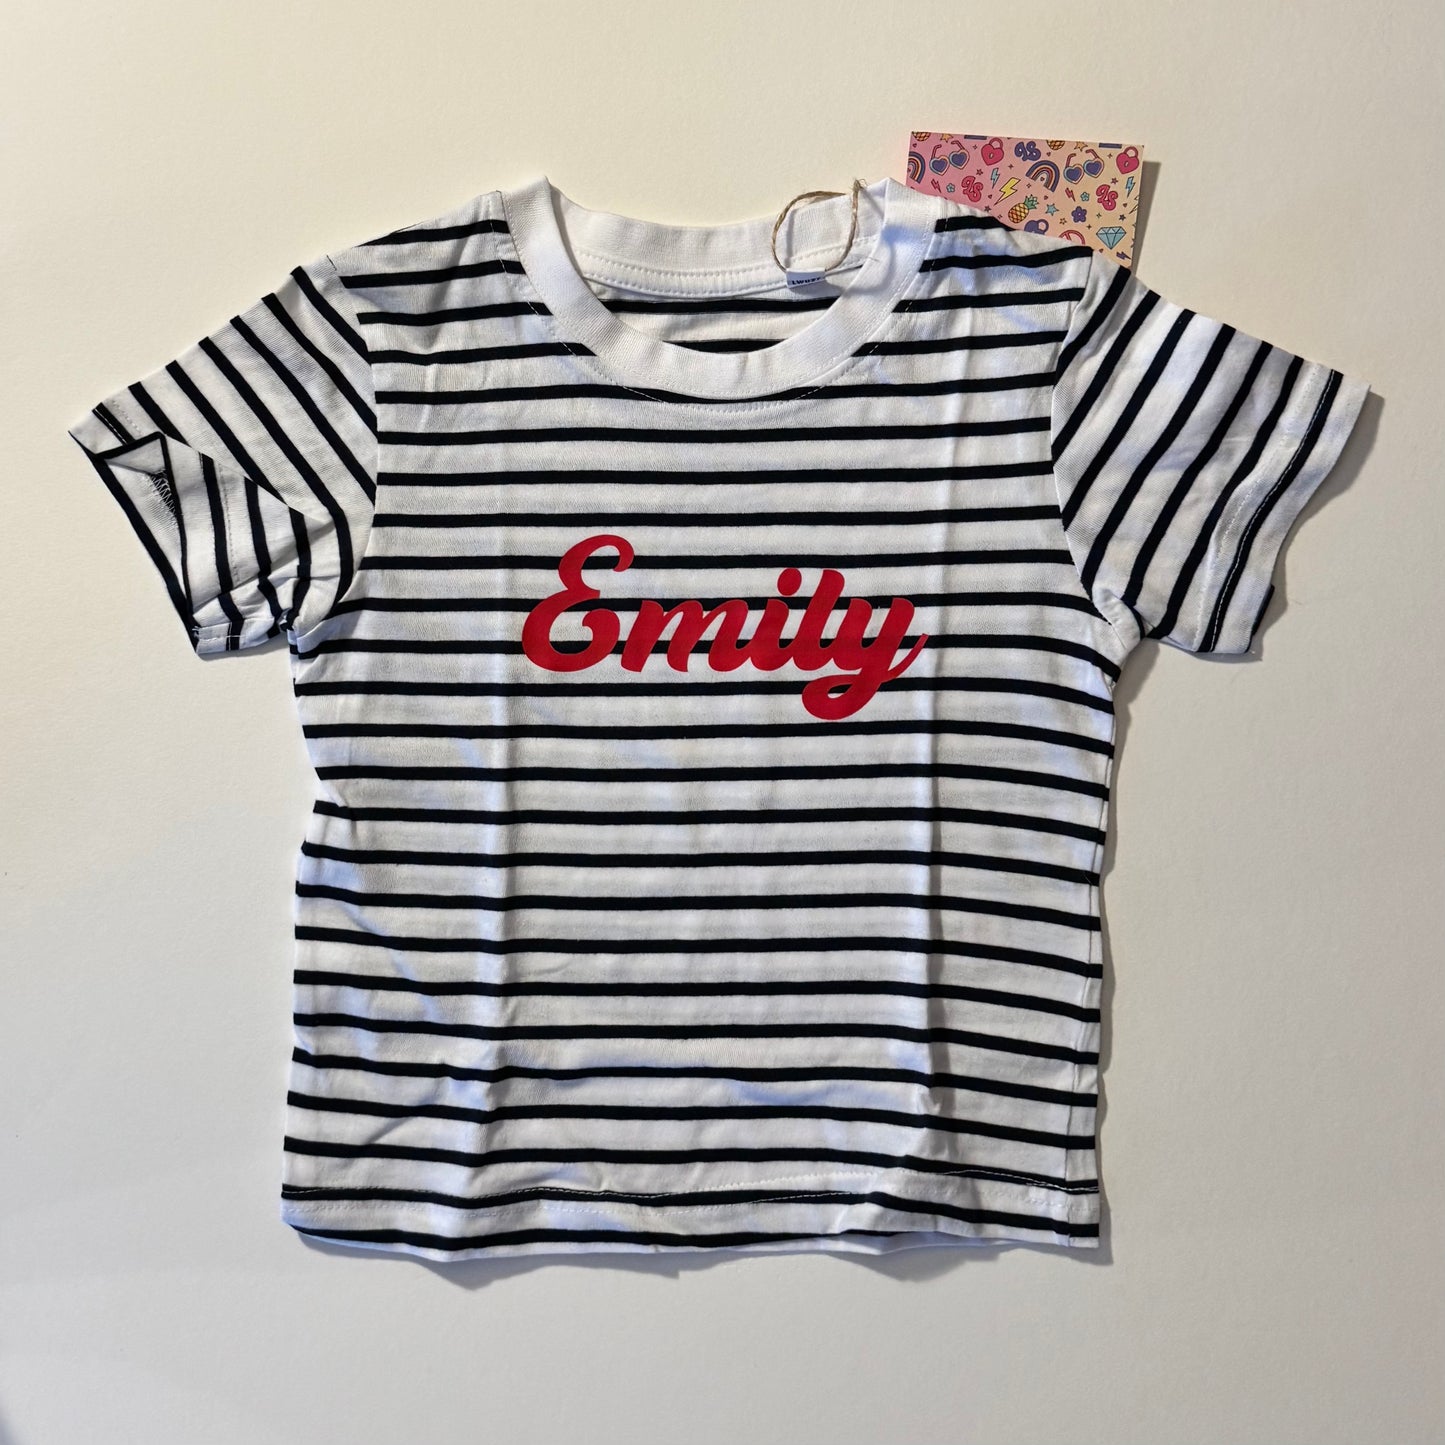 SALE Baby Personalised Stripe T-Shirt - 18-24 months